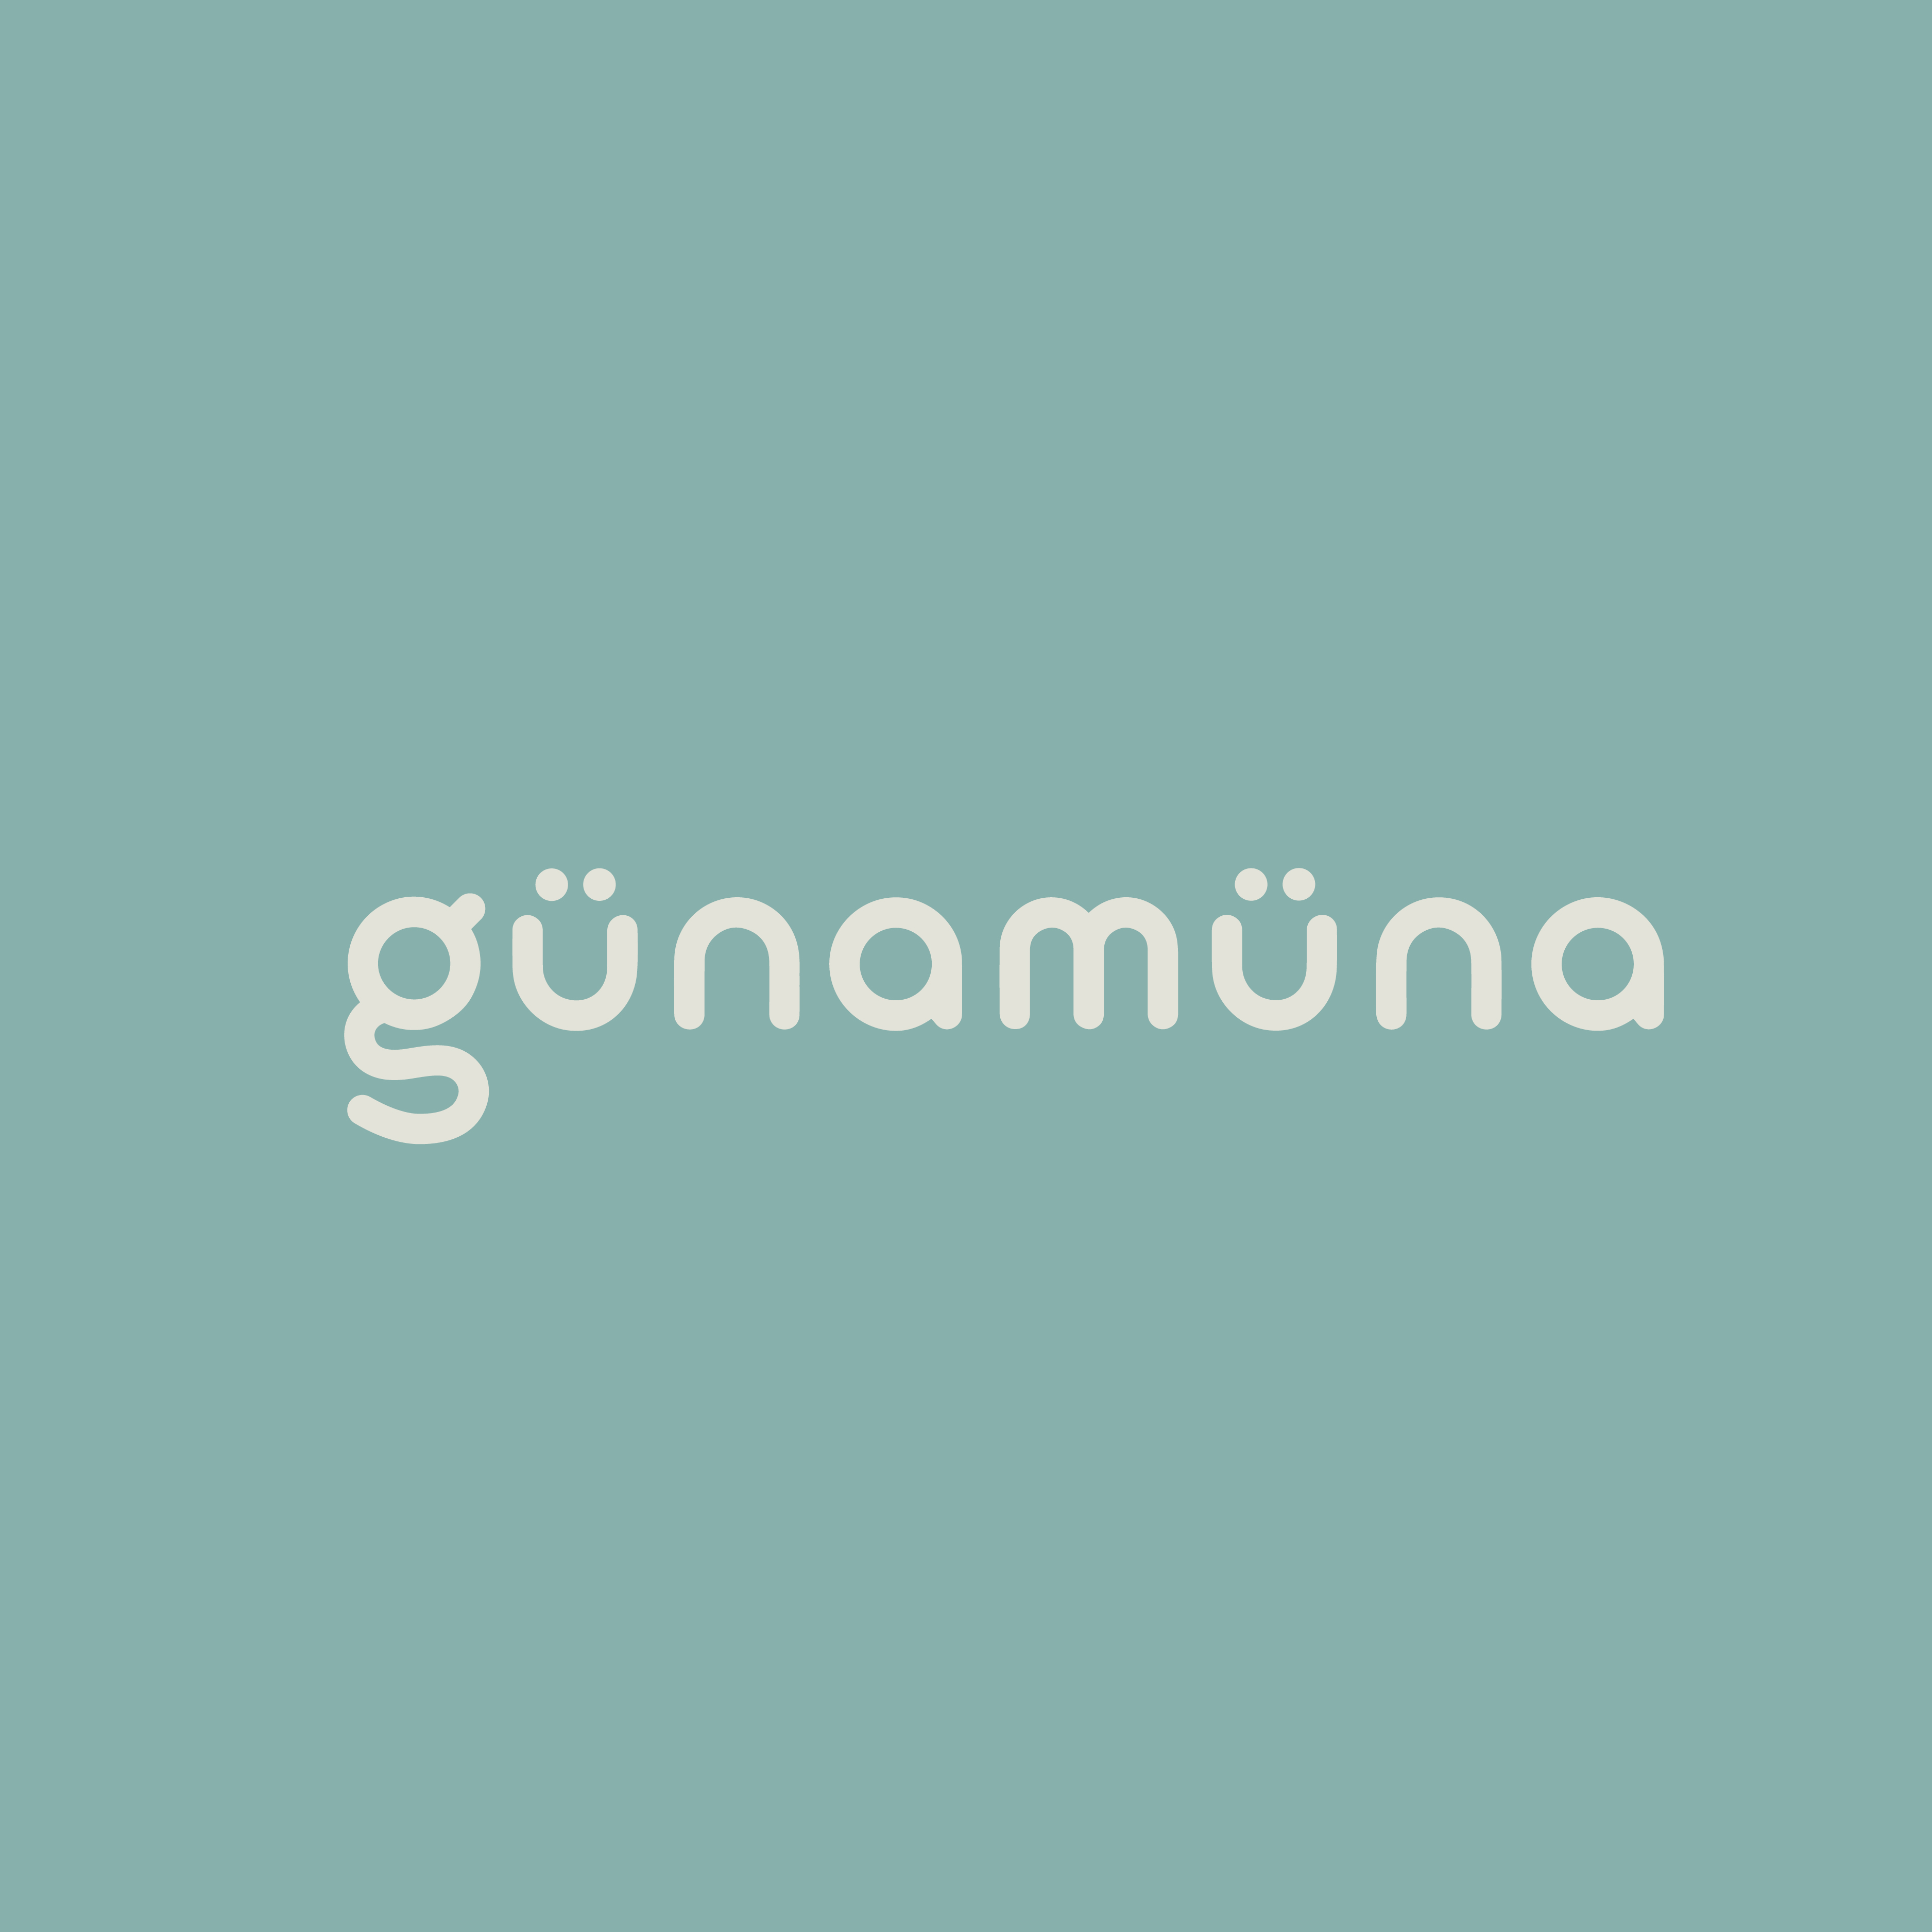 Gunamuna logo design by logo designer Favor the Brave for your inspiration and for the worlds largest logo competition